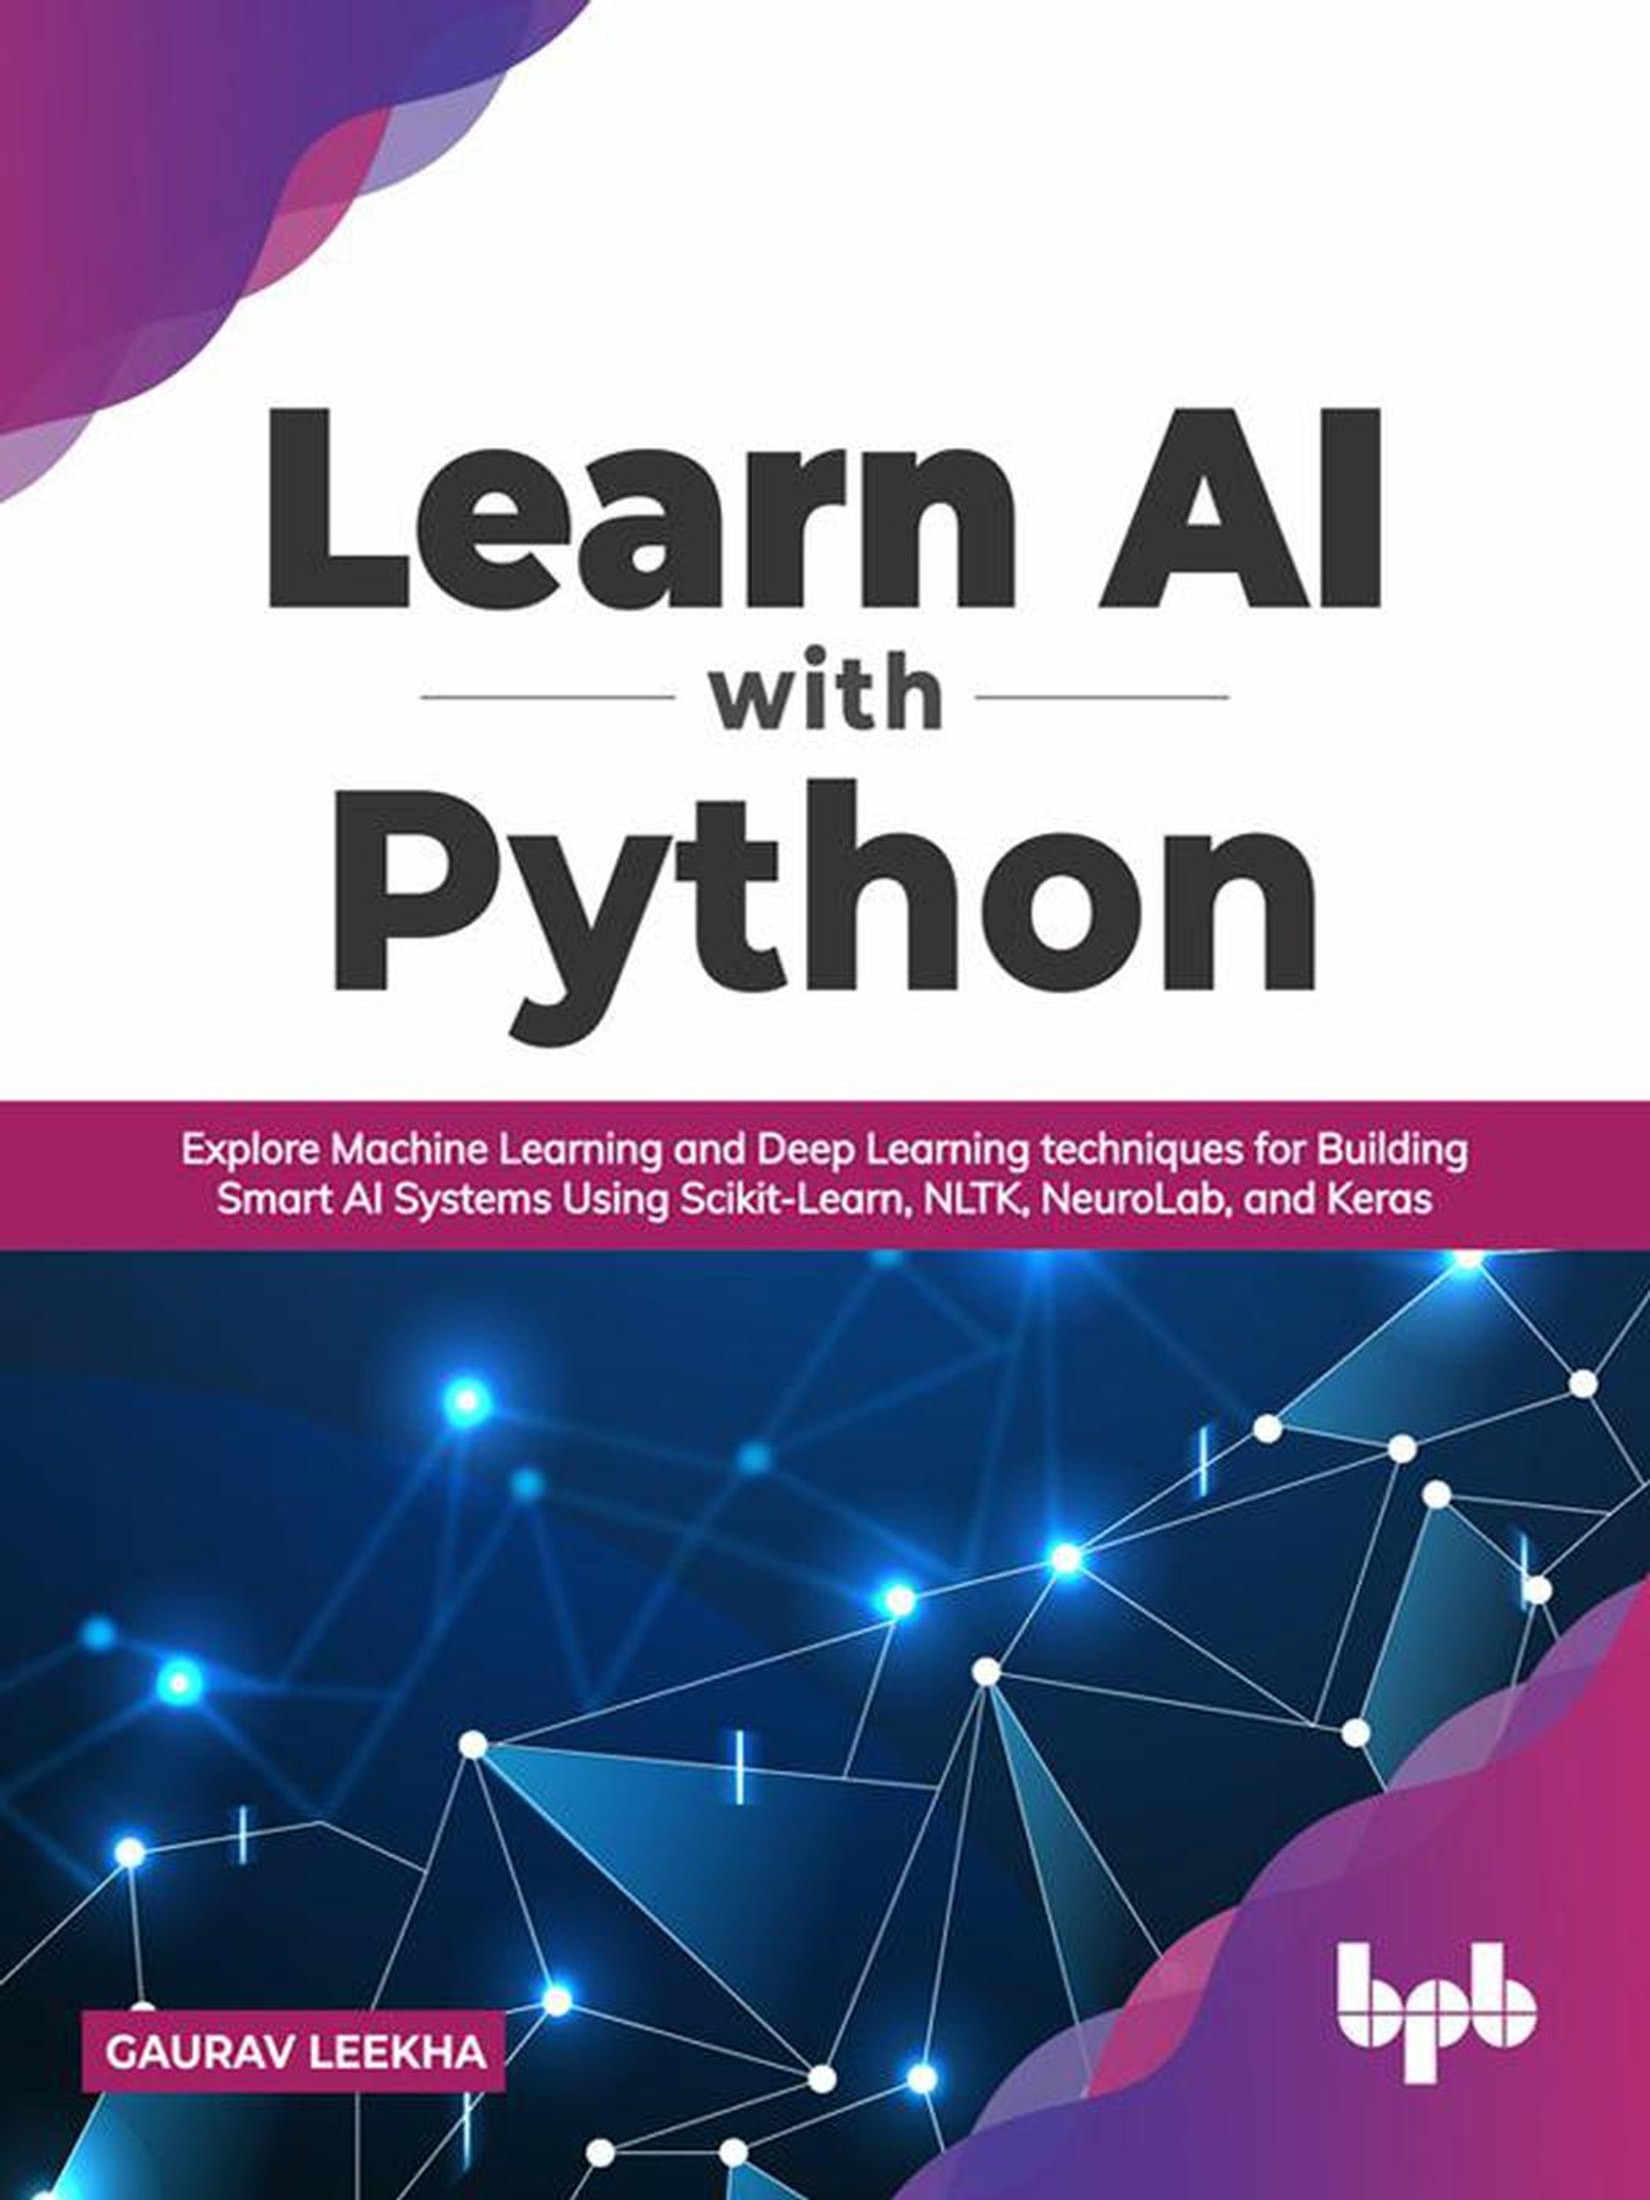 Learn AI with Python: Explore Machine Learning and Deep Learning techniques for Building Smart AI Systems Using Scikit-Learn, NLTK, NeuroLab, and Keras (English Edition)